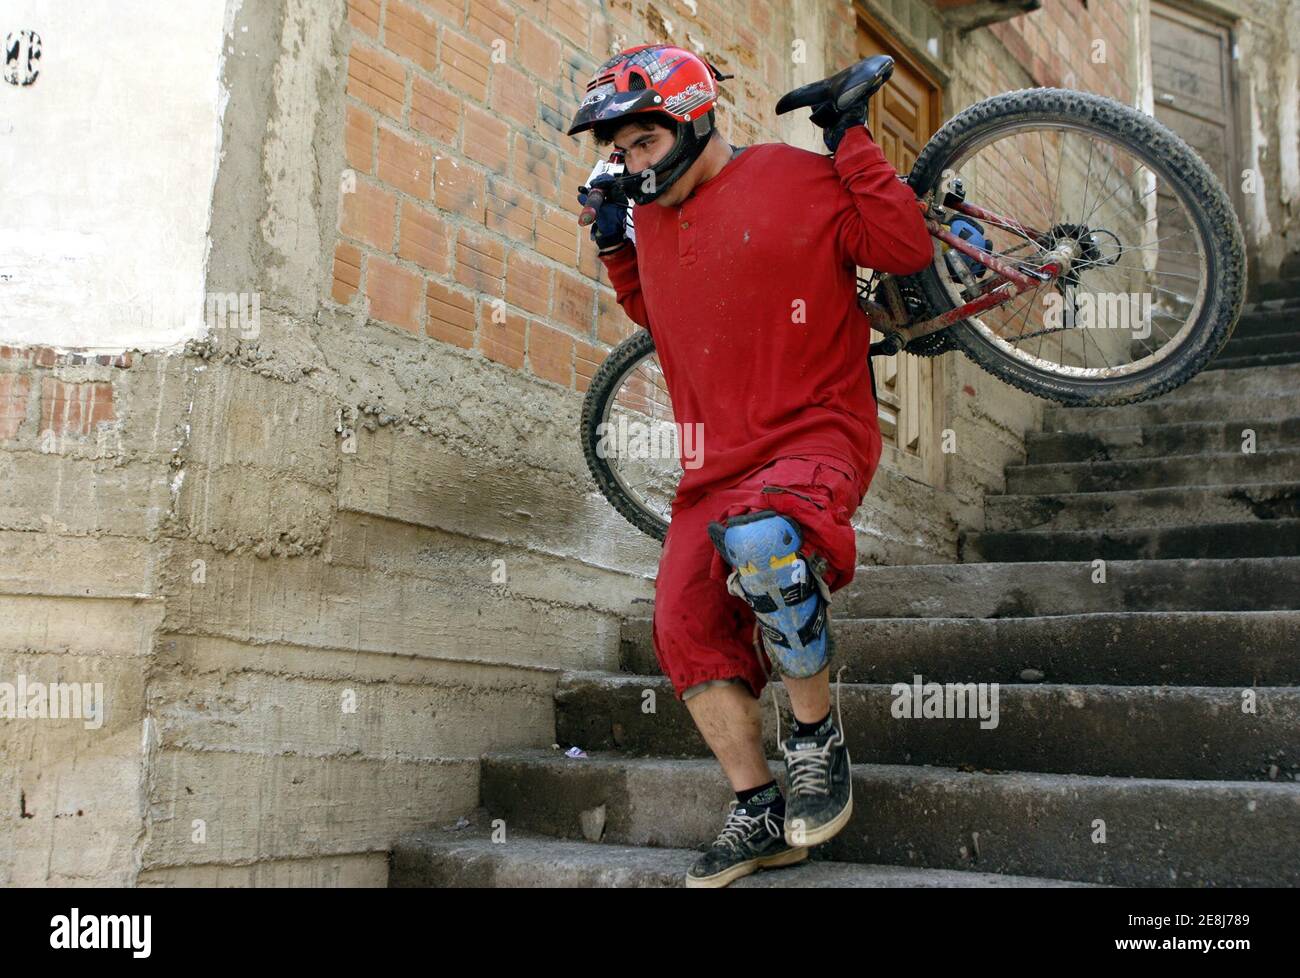 A rider carries his bike during the Red Bull urban assault "Condor's fall"in outskirts of La Paz, Bolivia, November 26, 2005. Extreme mountain bikers of Bolivia, Chile ,Ecuador and U.S.